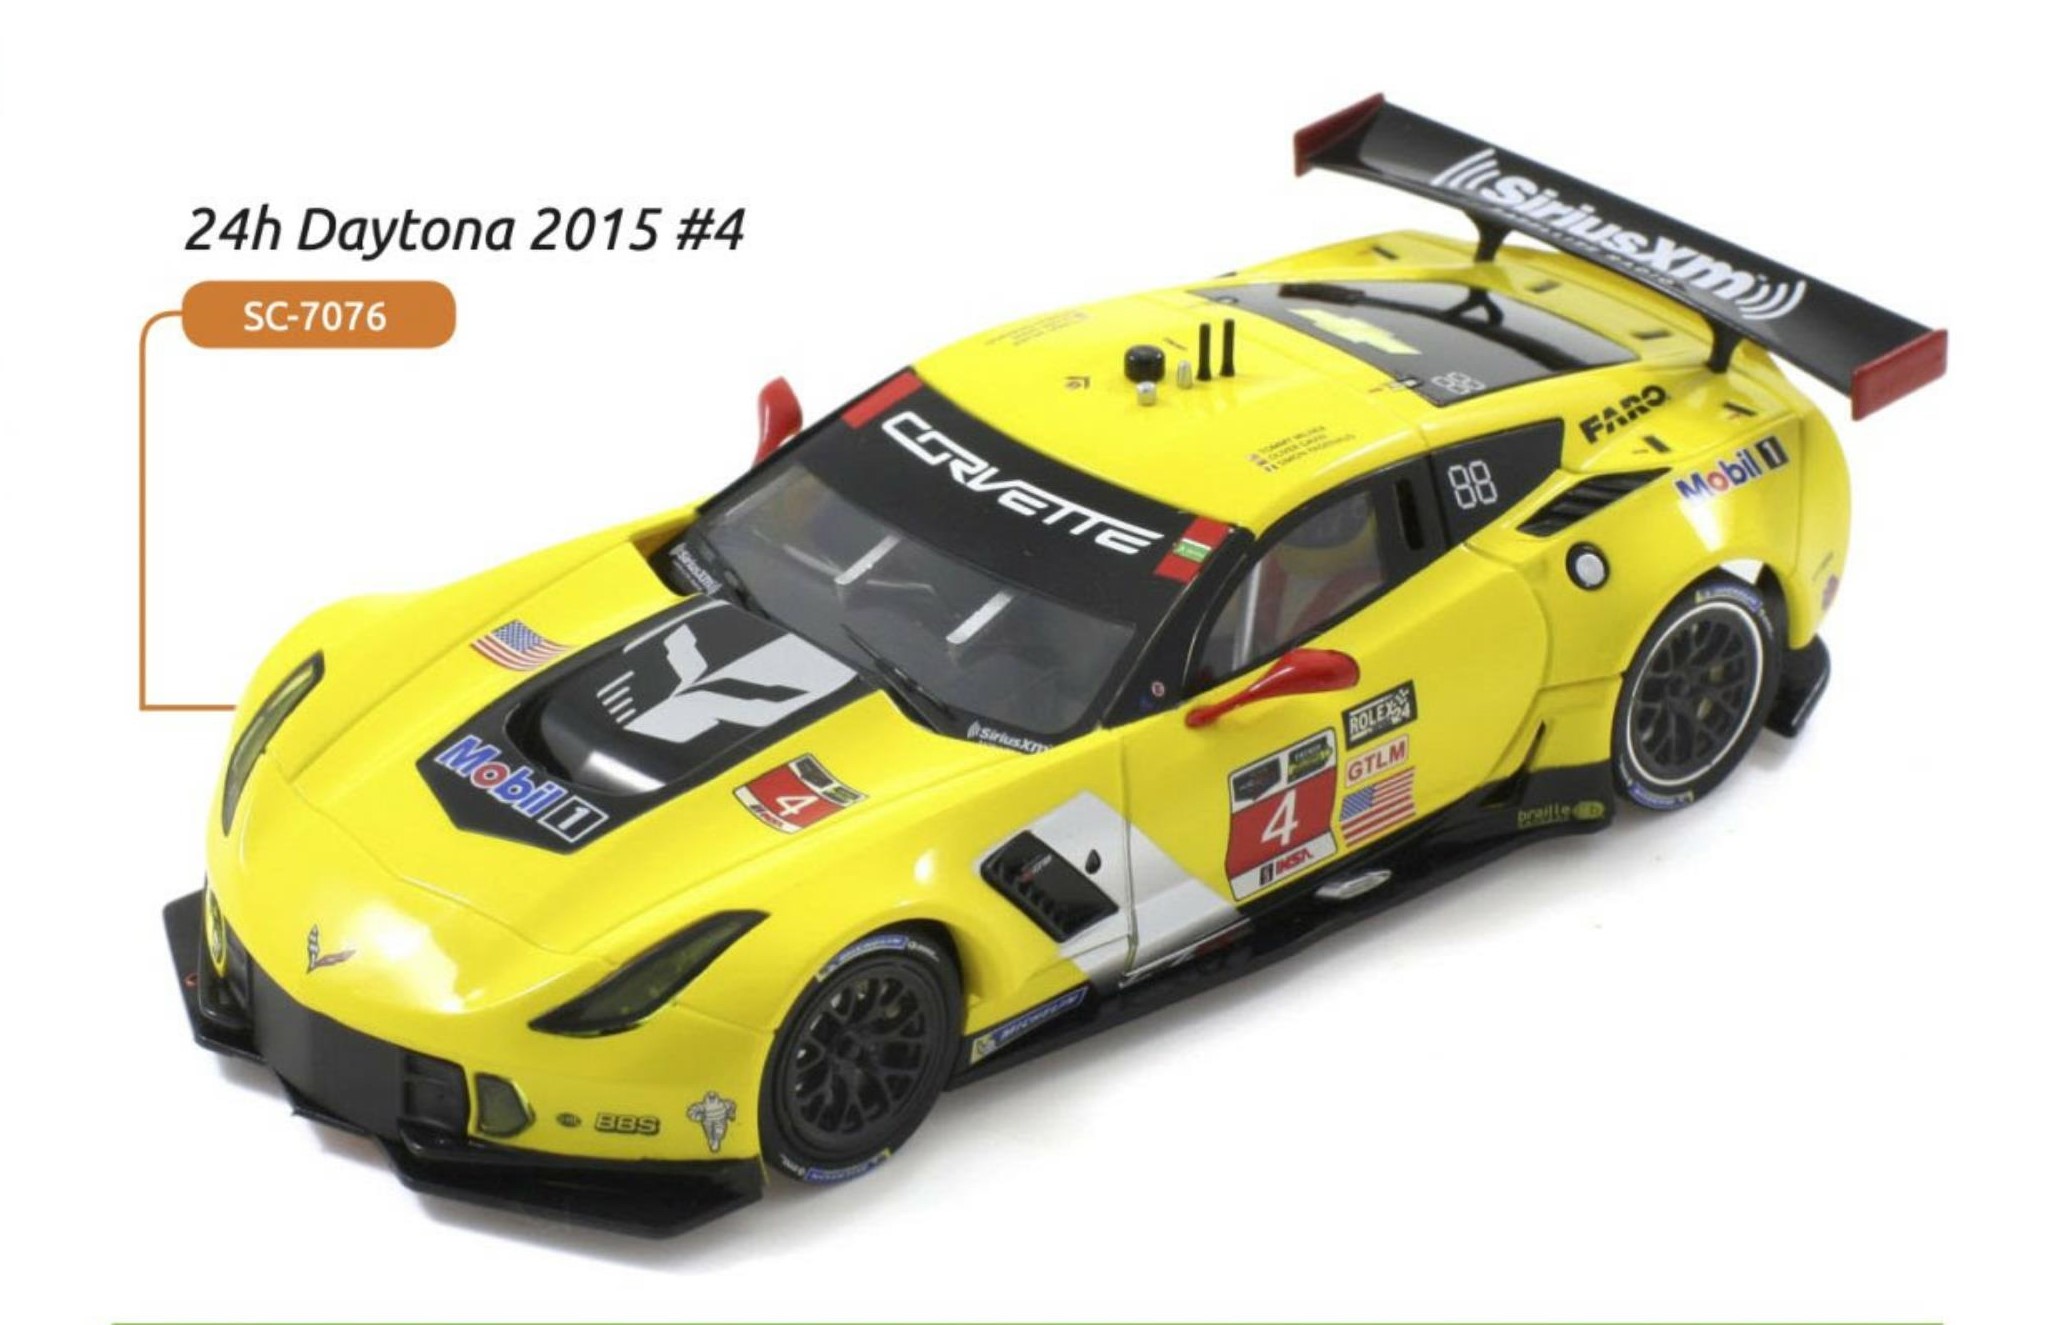 SC-7076HS Daytona 2015 Corvette C7R #4 with Home Series chassis